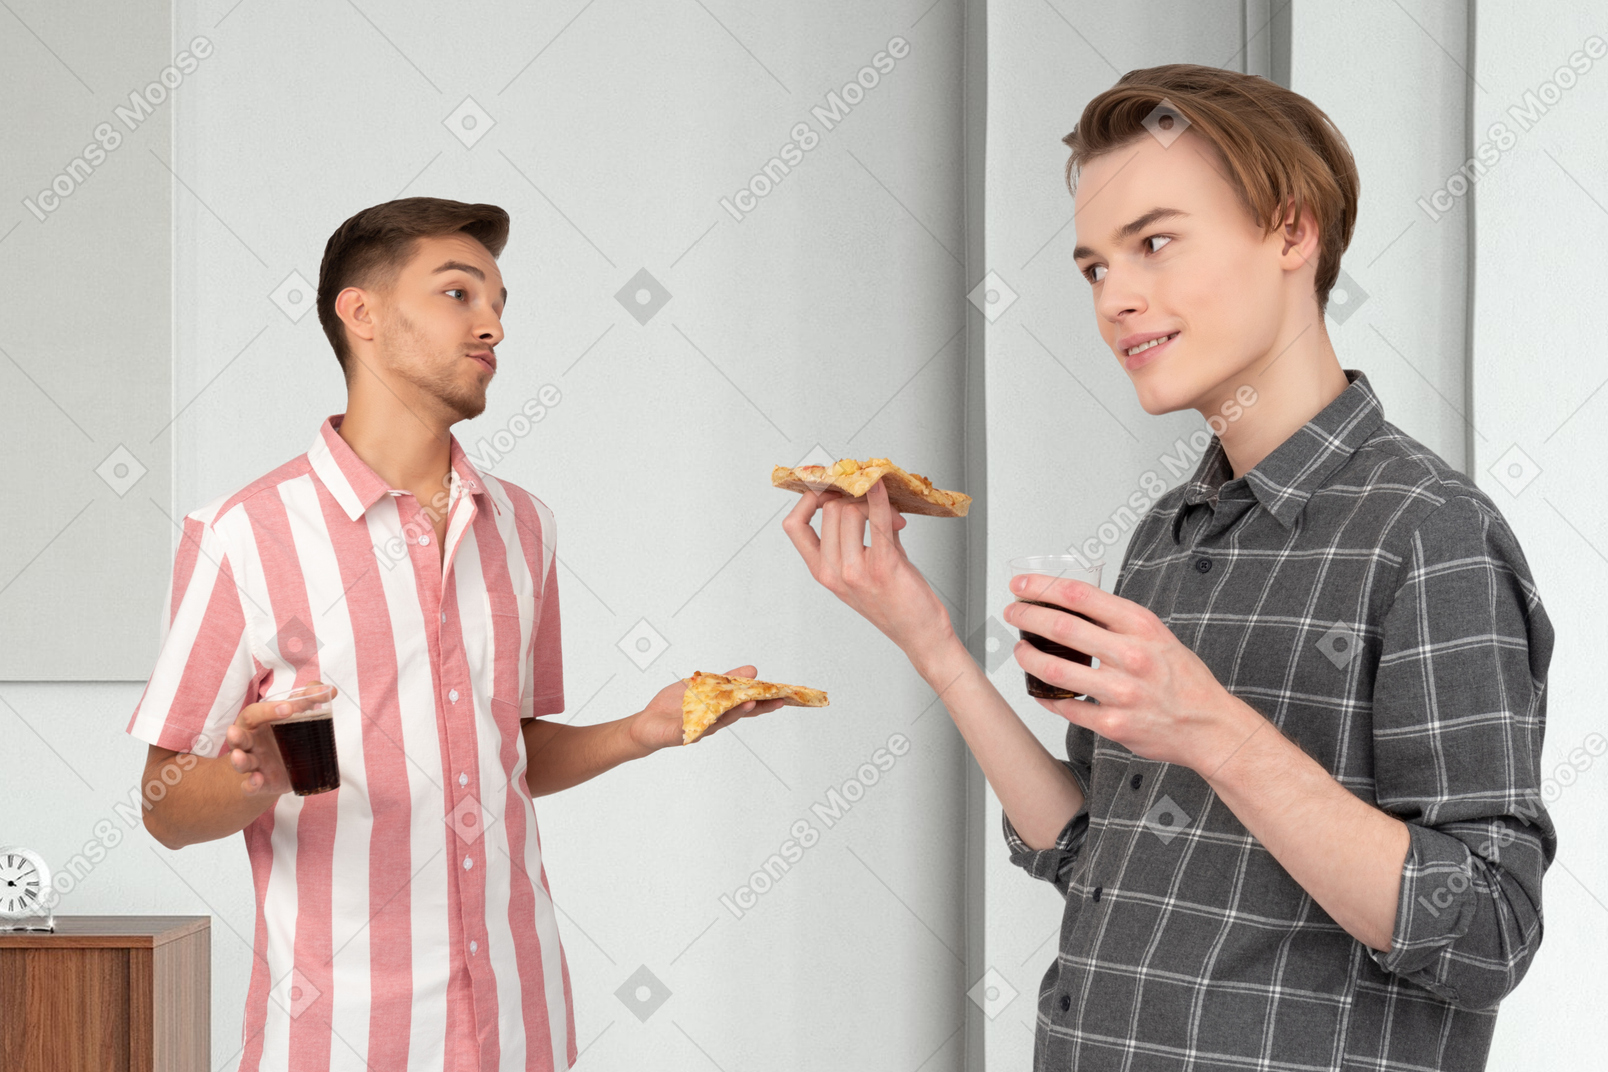 Man holding a slice of pizza